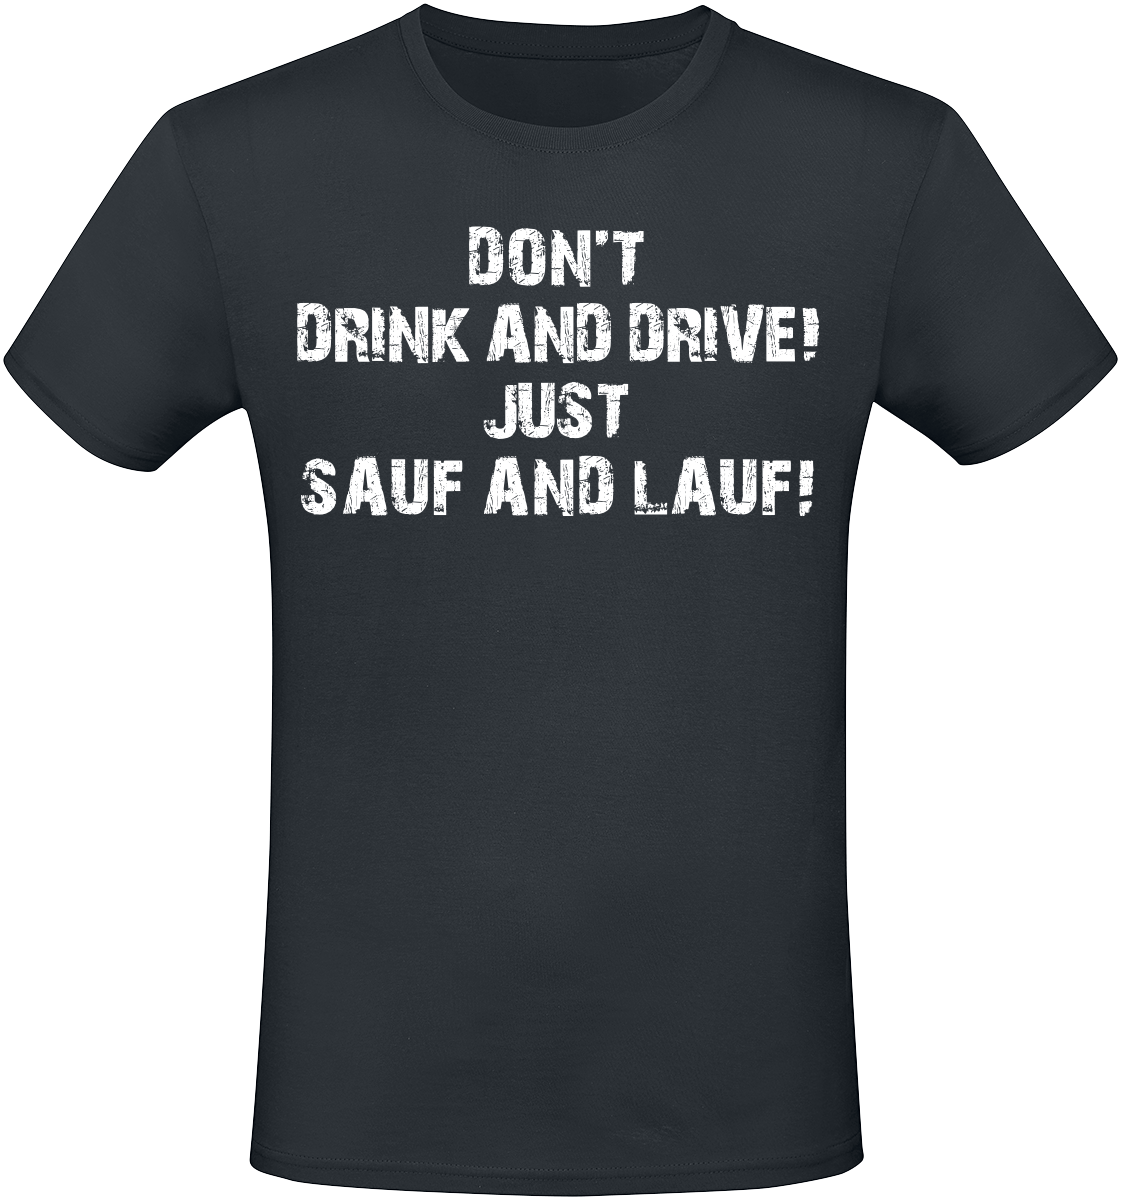 Alkohol & Party - Don`T Drink And Drive! Just Sauf And Lauf! - T-Shirt - schwarz